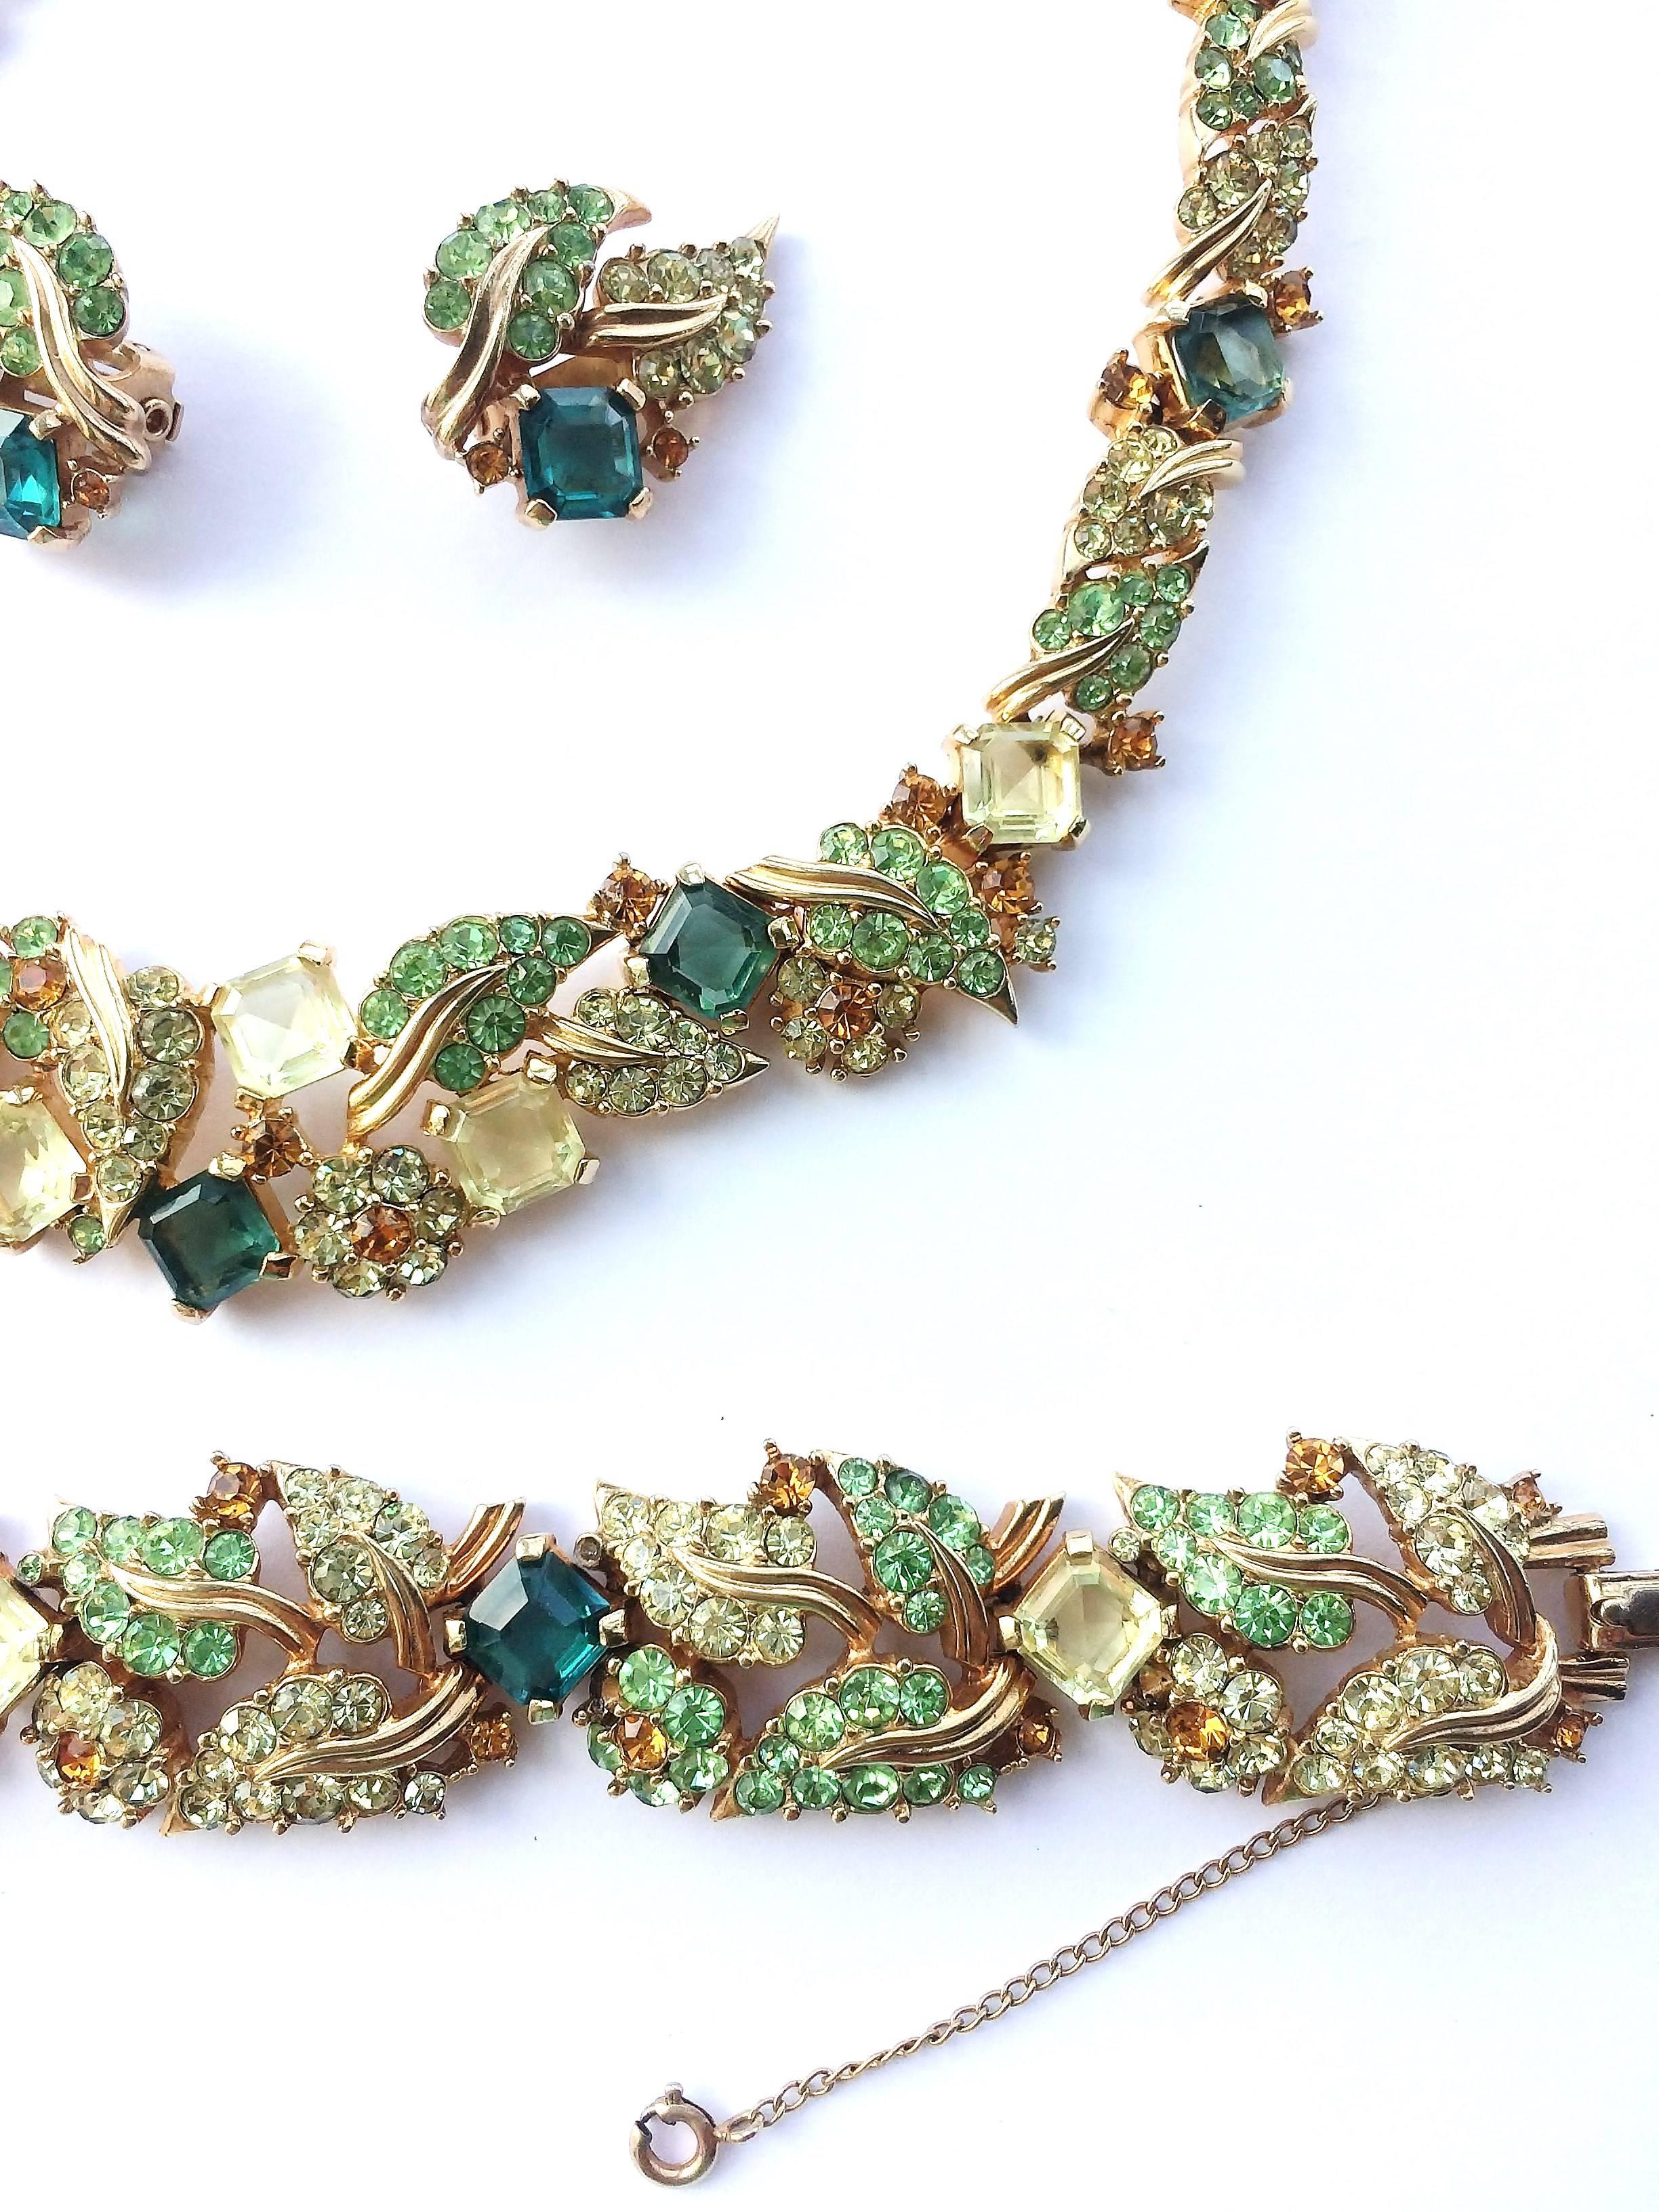 Beautifully designed - a rare necklace, bracelet and earrings from Marcel Boucher, a gorgeous mixture of square stones, and leaf motifs in soft peridot ,citrine, topaz, and emerald paste. Worn altogether or as individual pieces, this set is